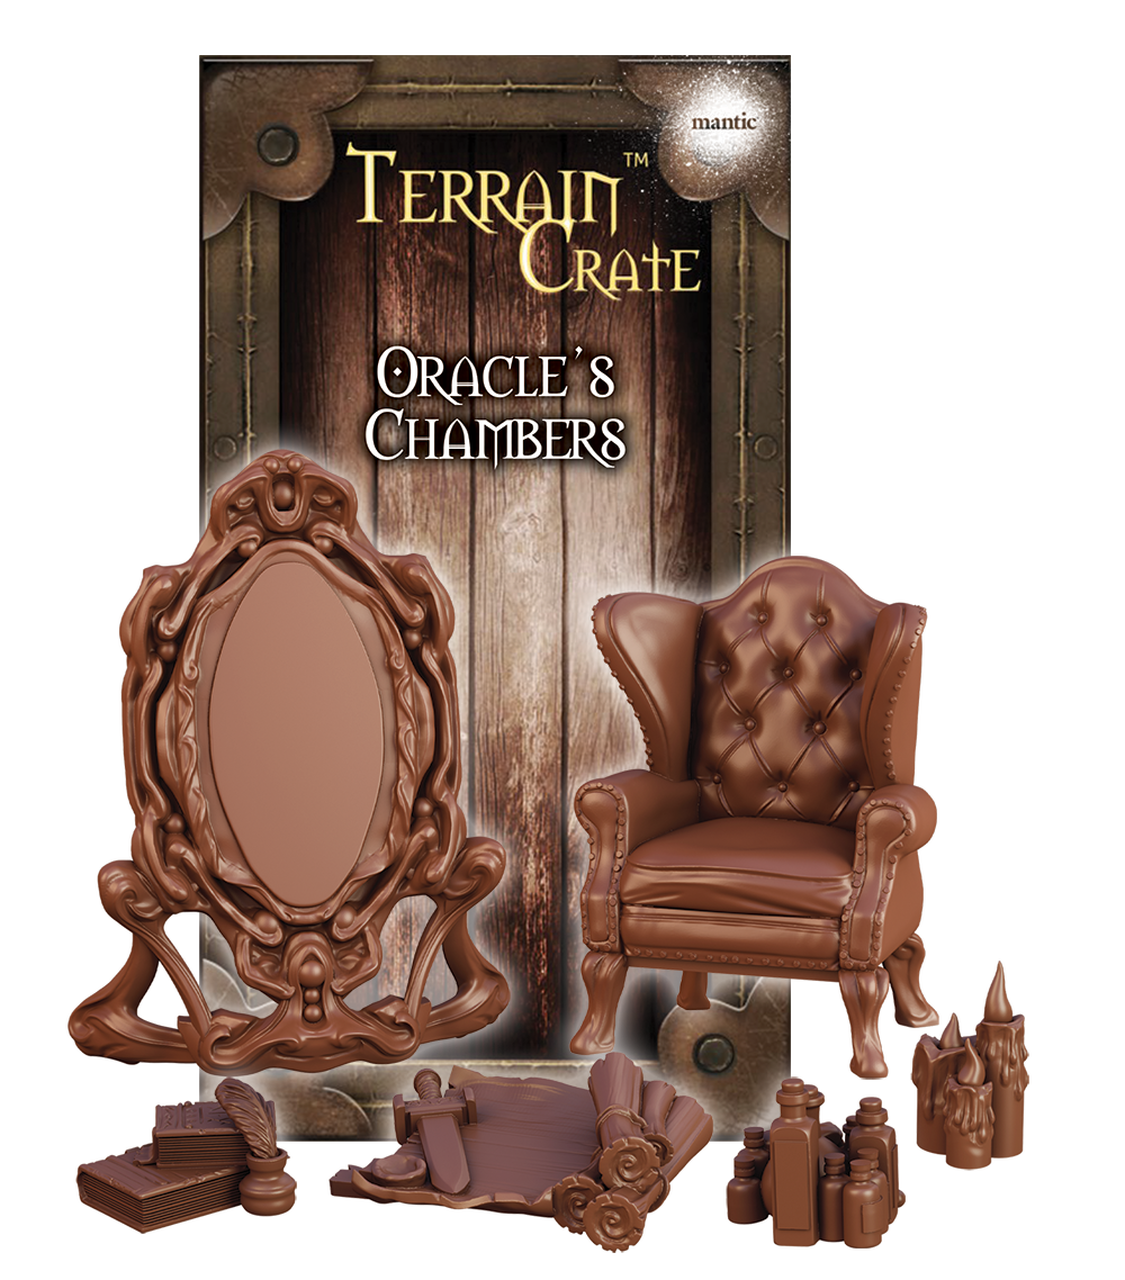 TERRAIN CRATE: ORACLE'S CHAMBER